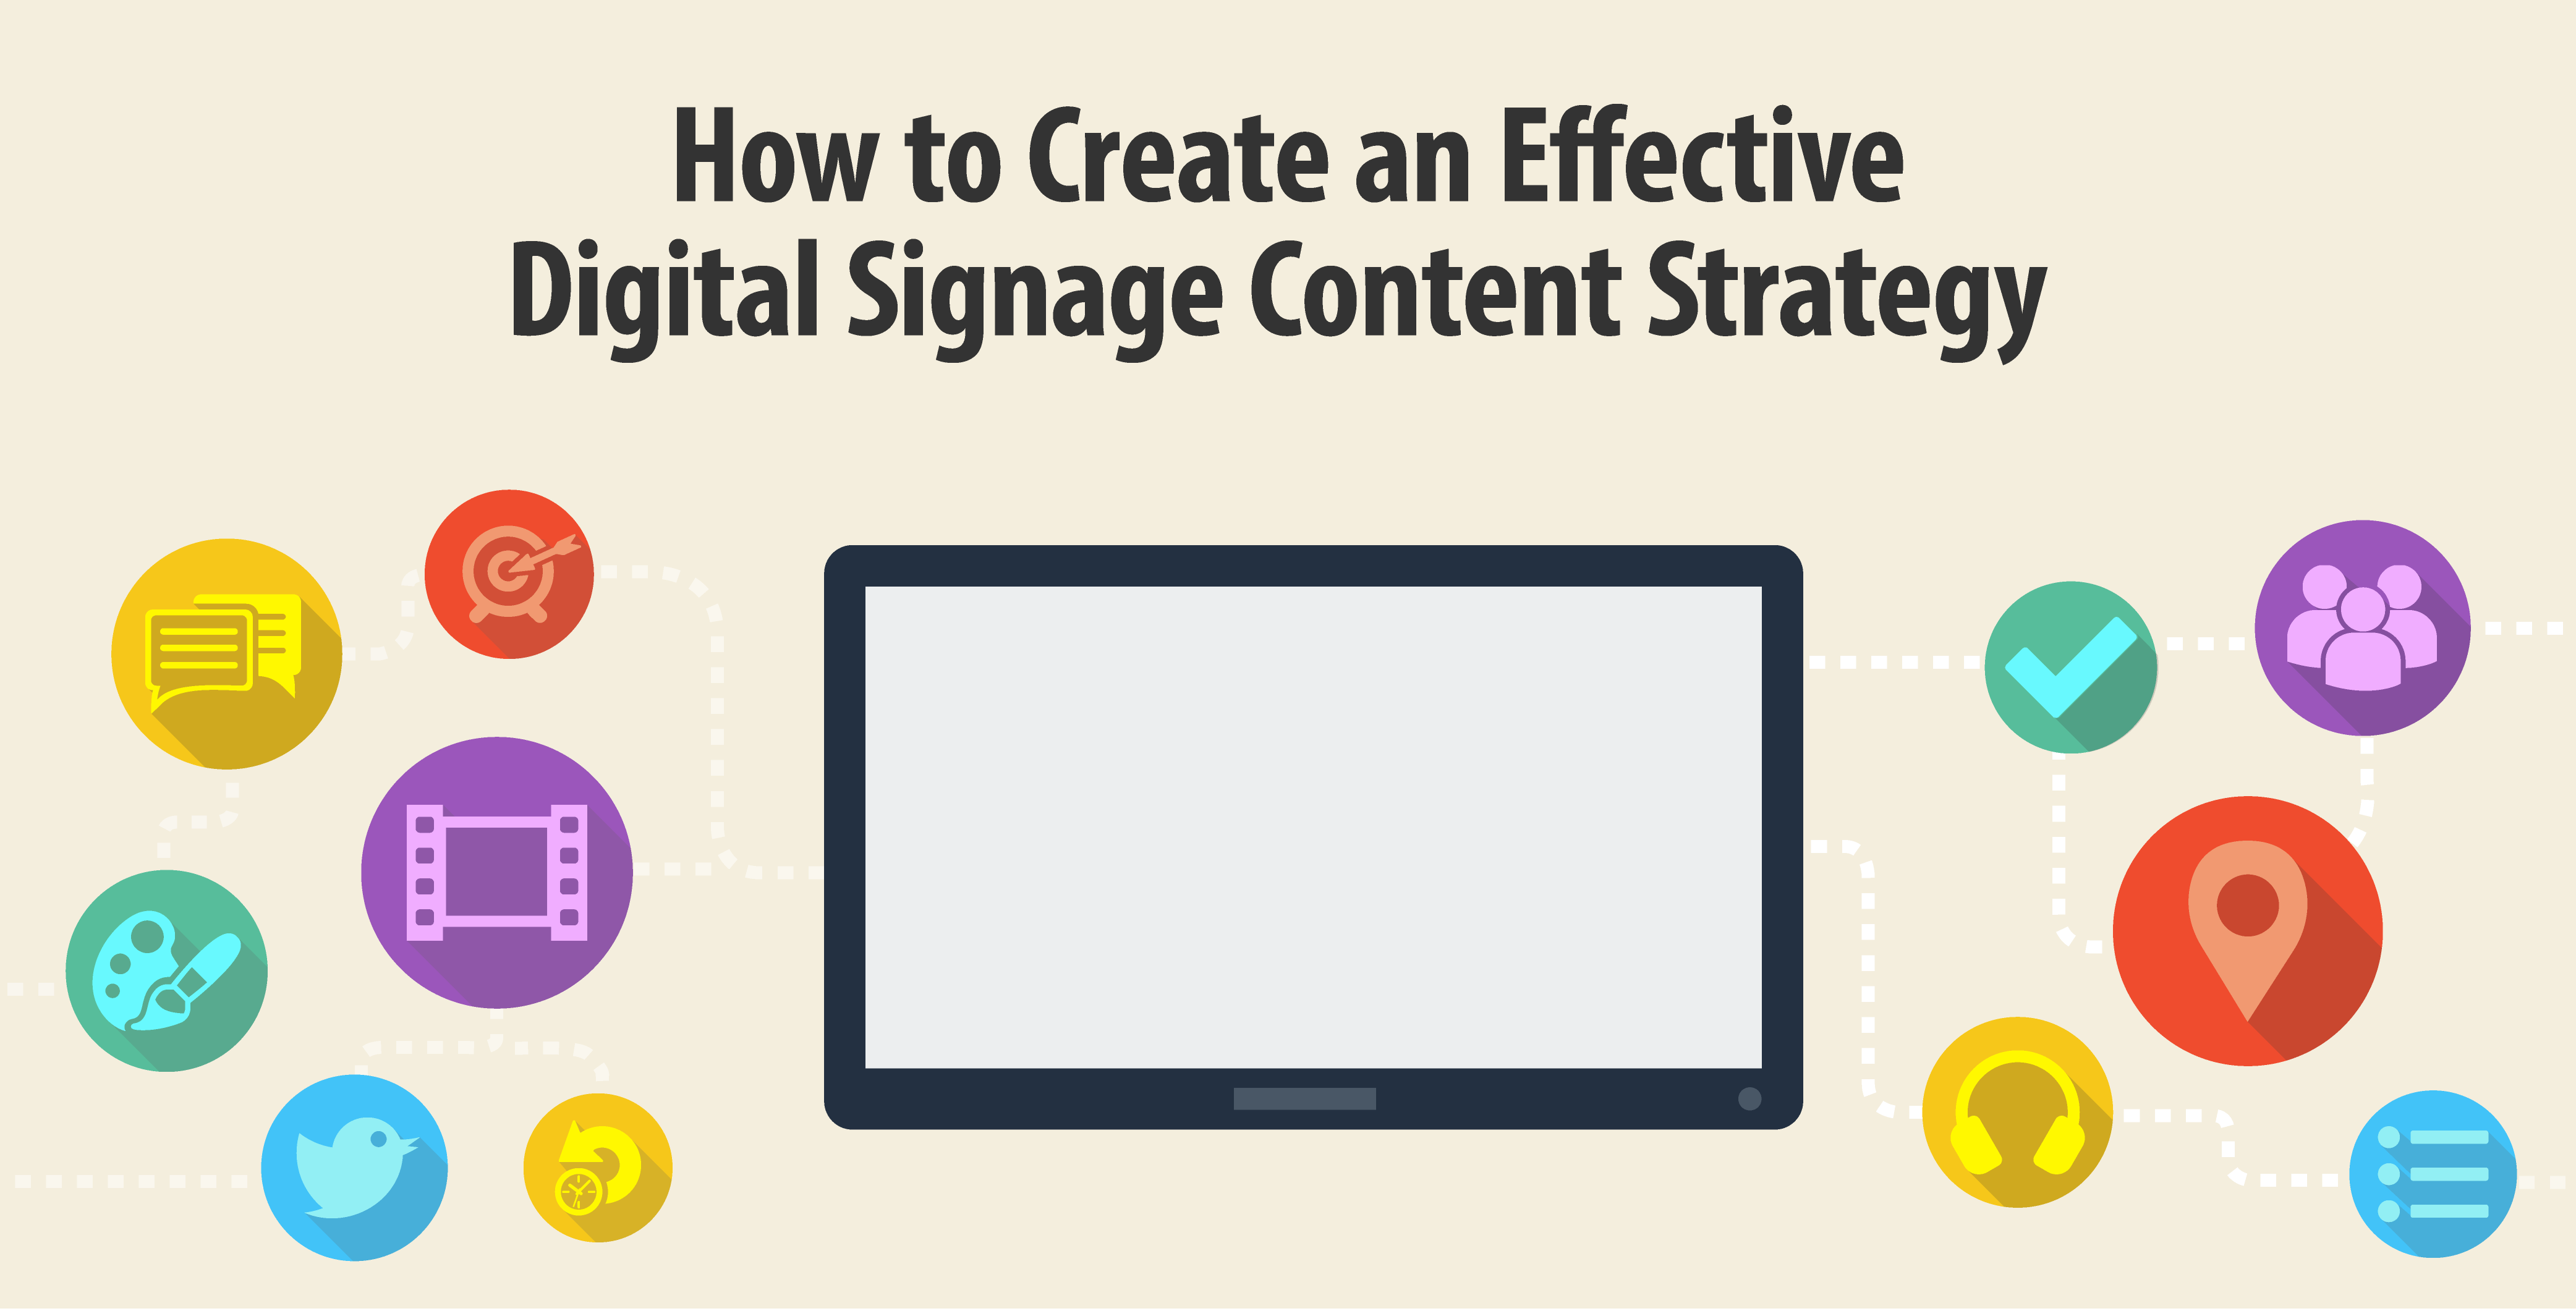 Create a Useful Digital Signage Content Strategy by Answering These 9 Questions